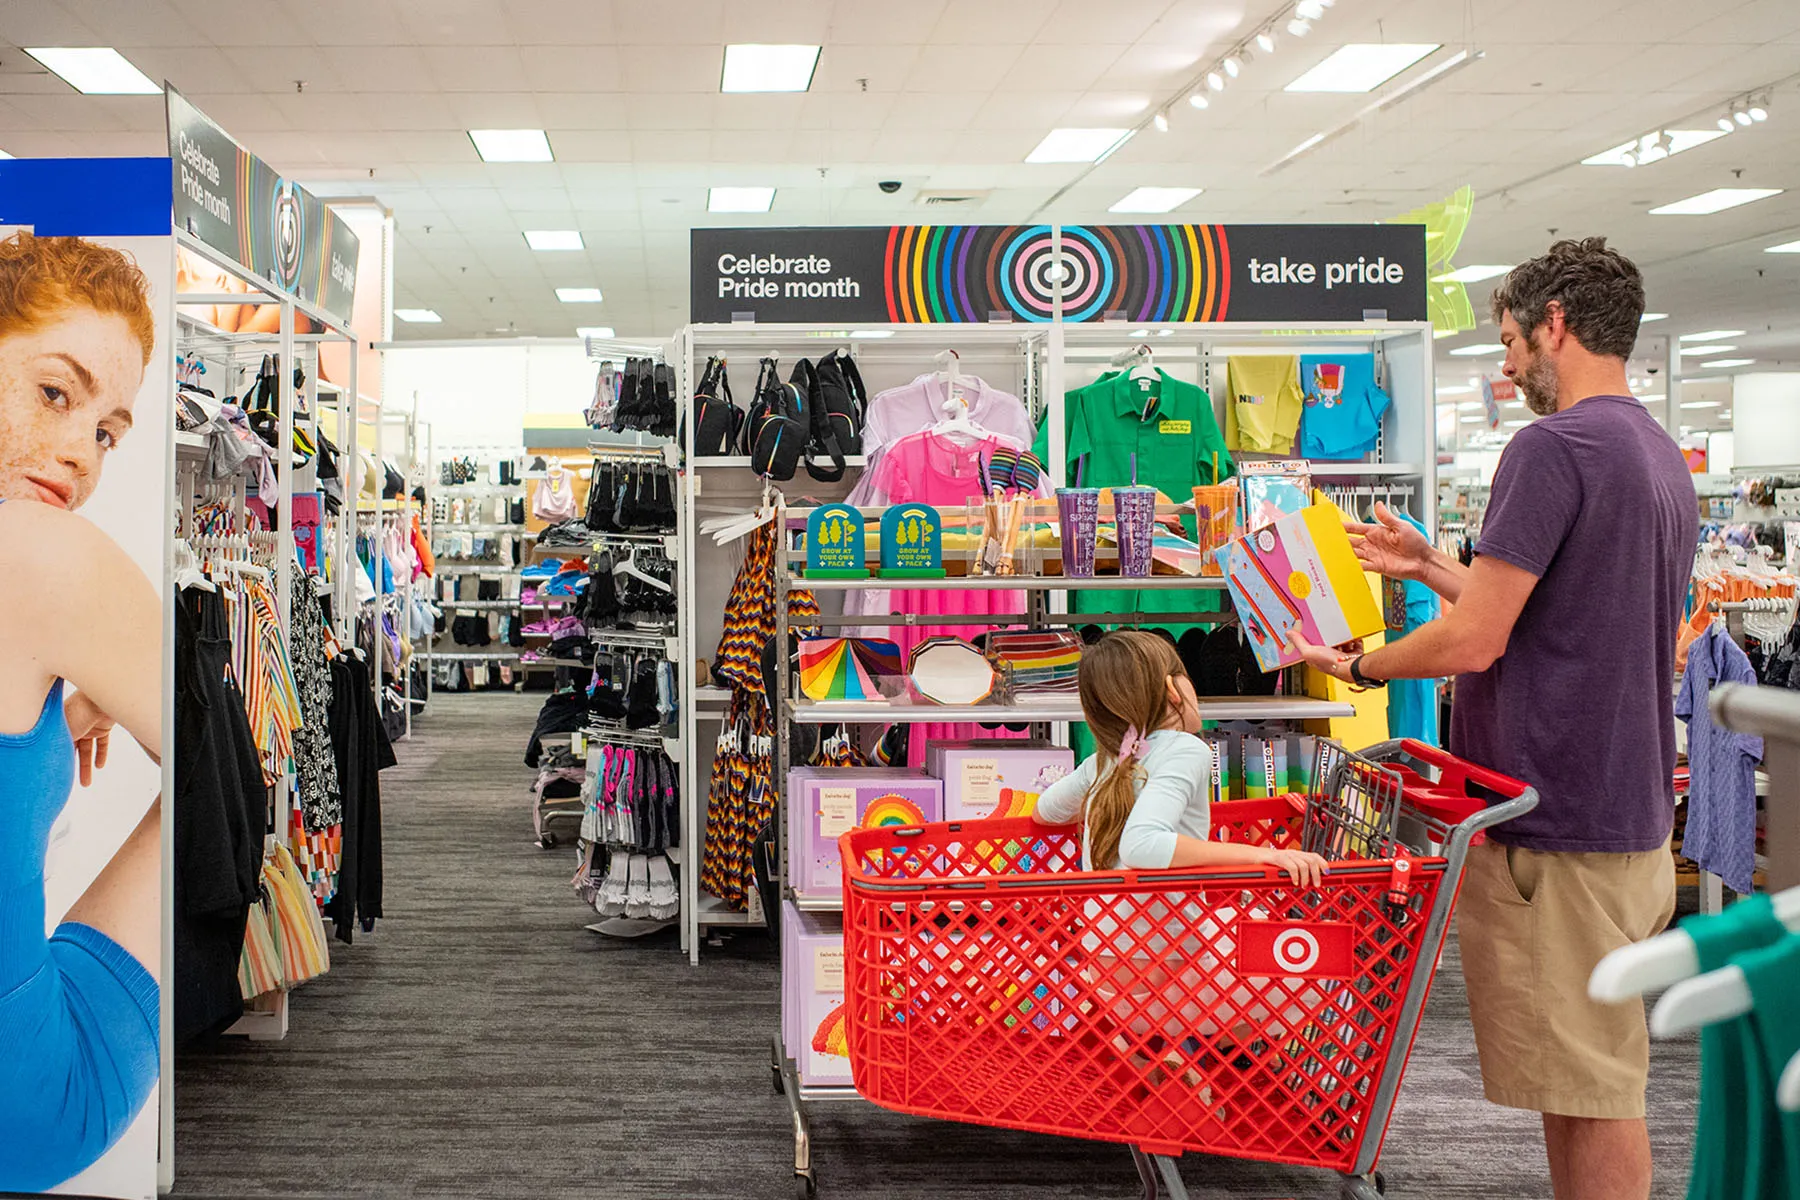 When Target pulled back on Pride merch, these small queer-owned businesses  had to manage the fallout - MinnPost